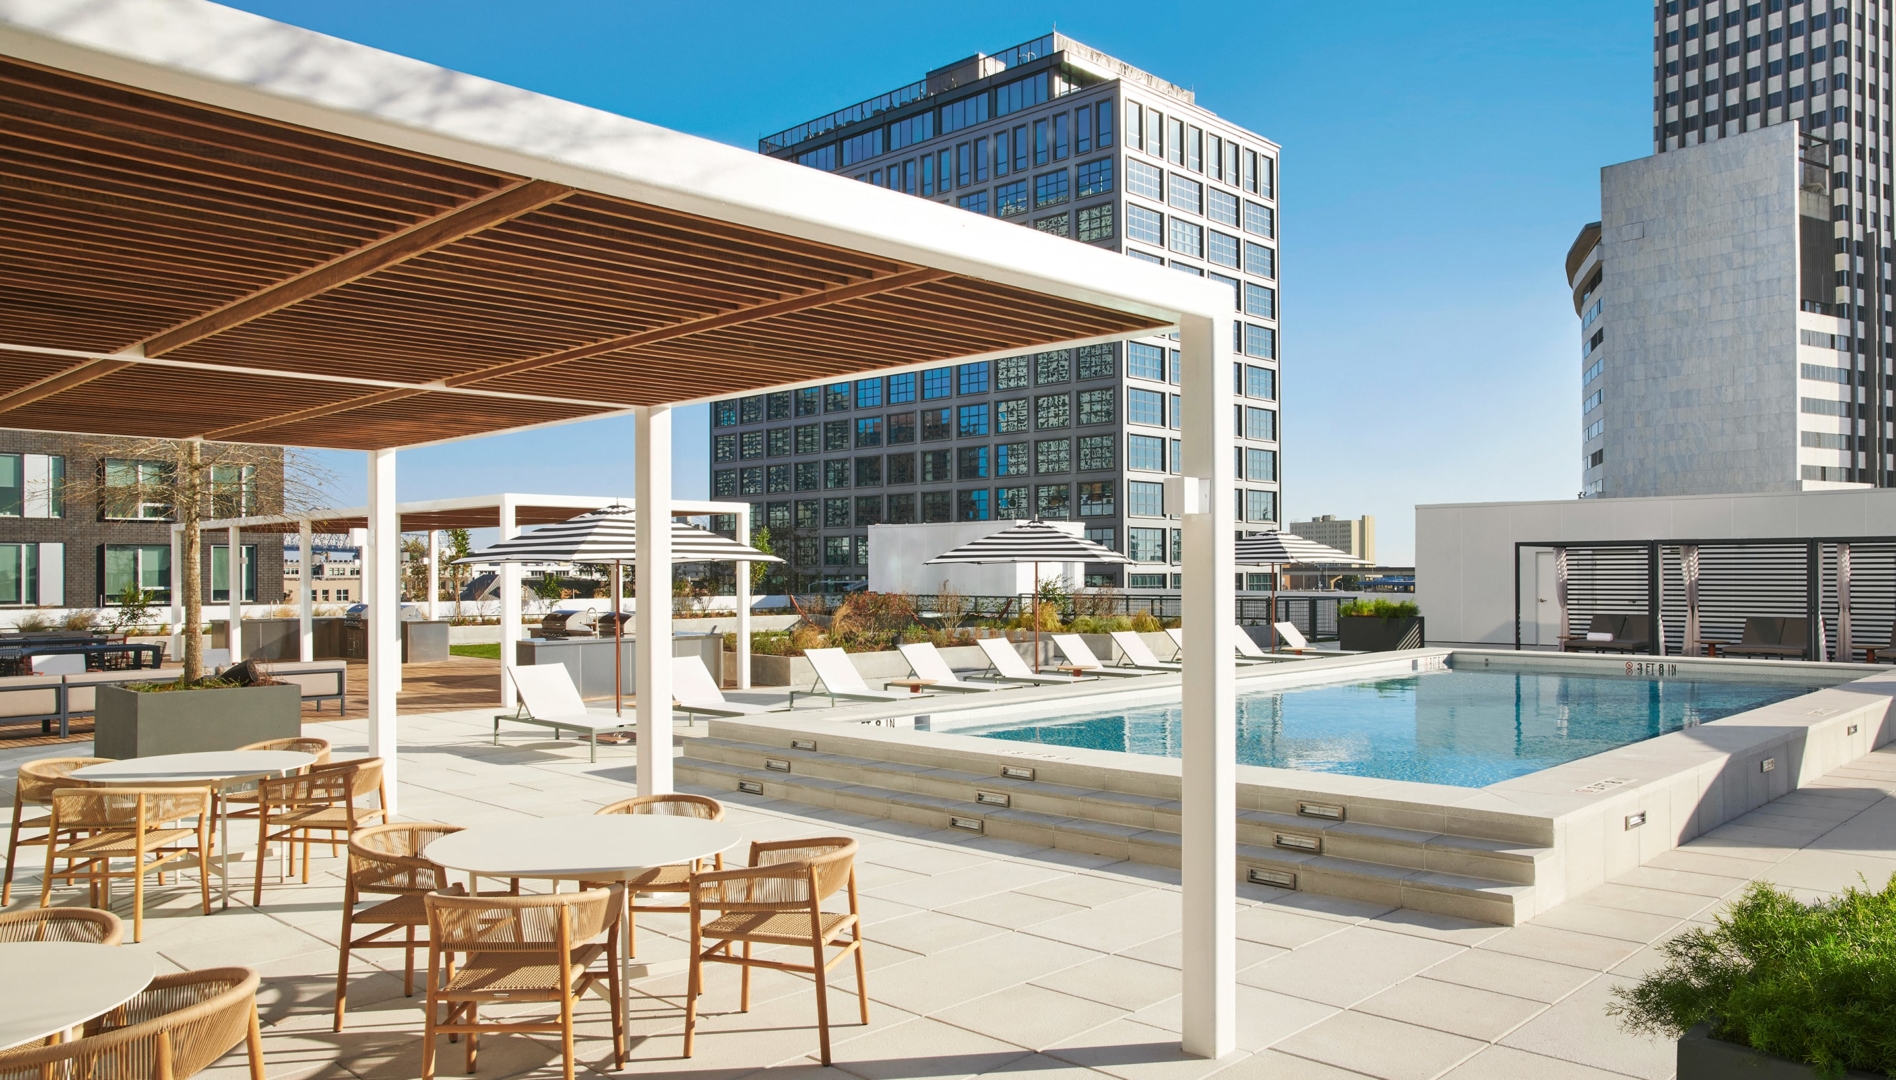 Roof-top pool deck with resort-style cabanas and modern furniture